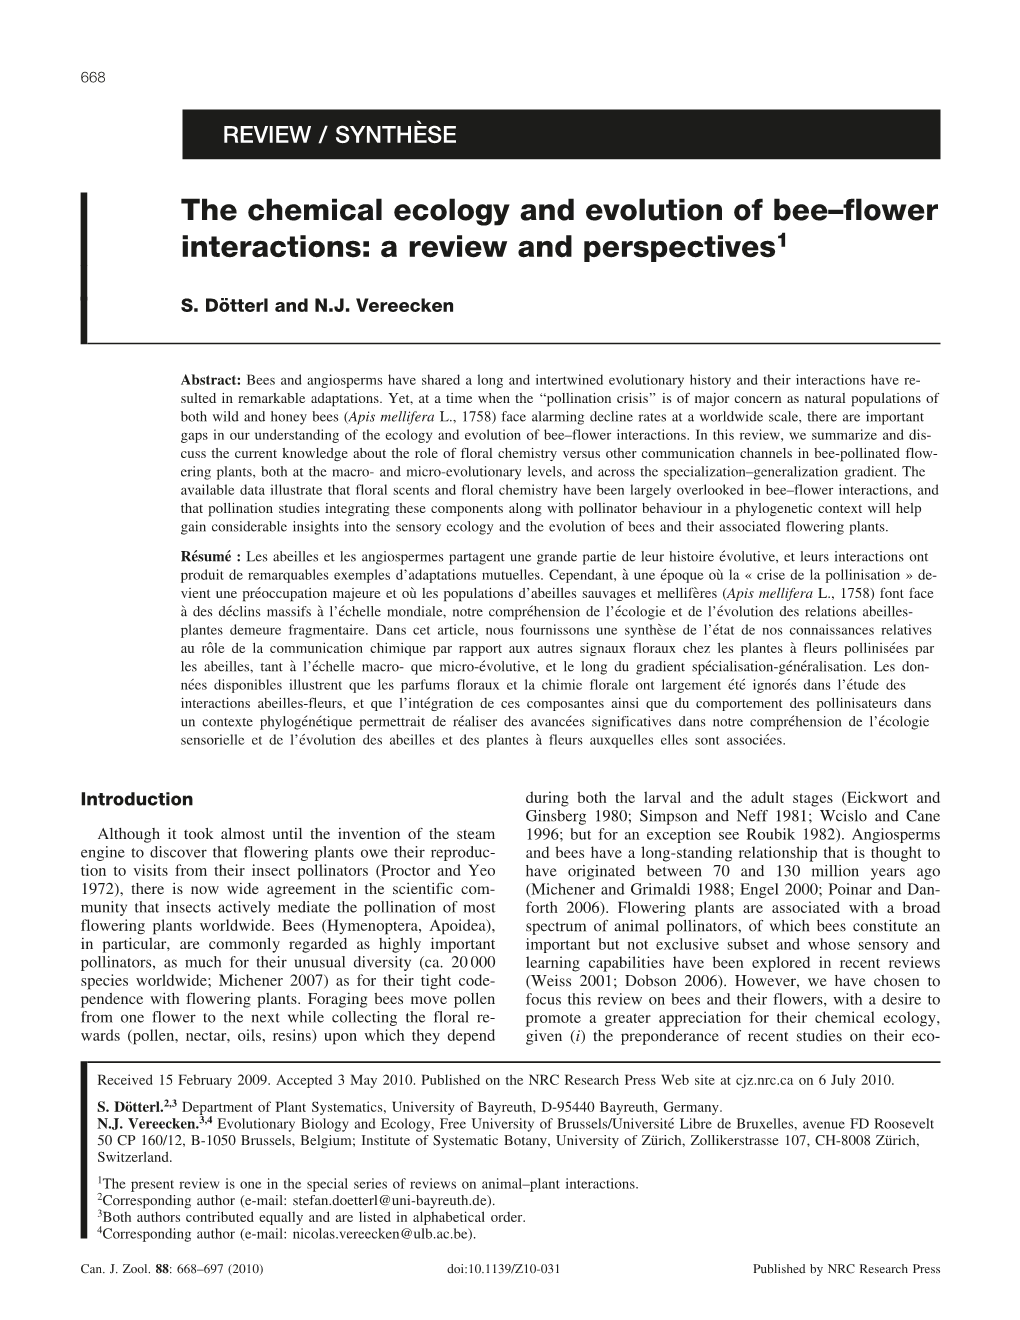 The Chemical Ecology and Evolution of Bee–Flower Interactions: a Review and Perspectives1